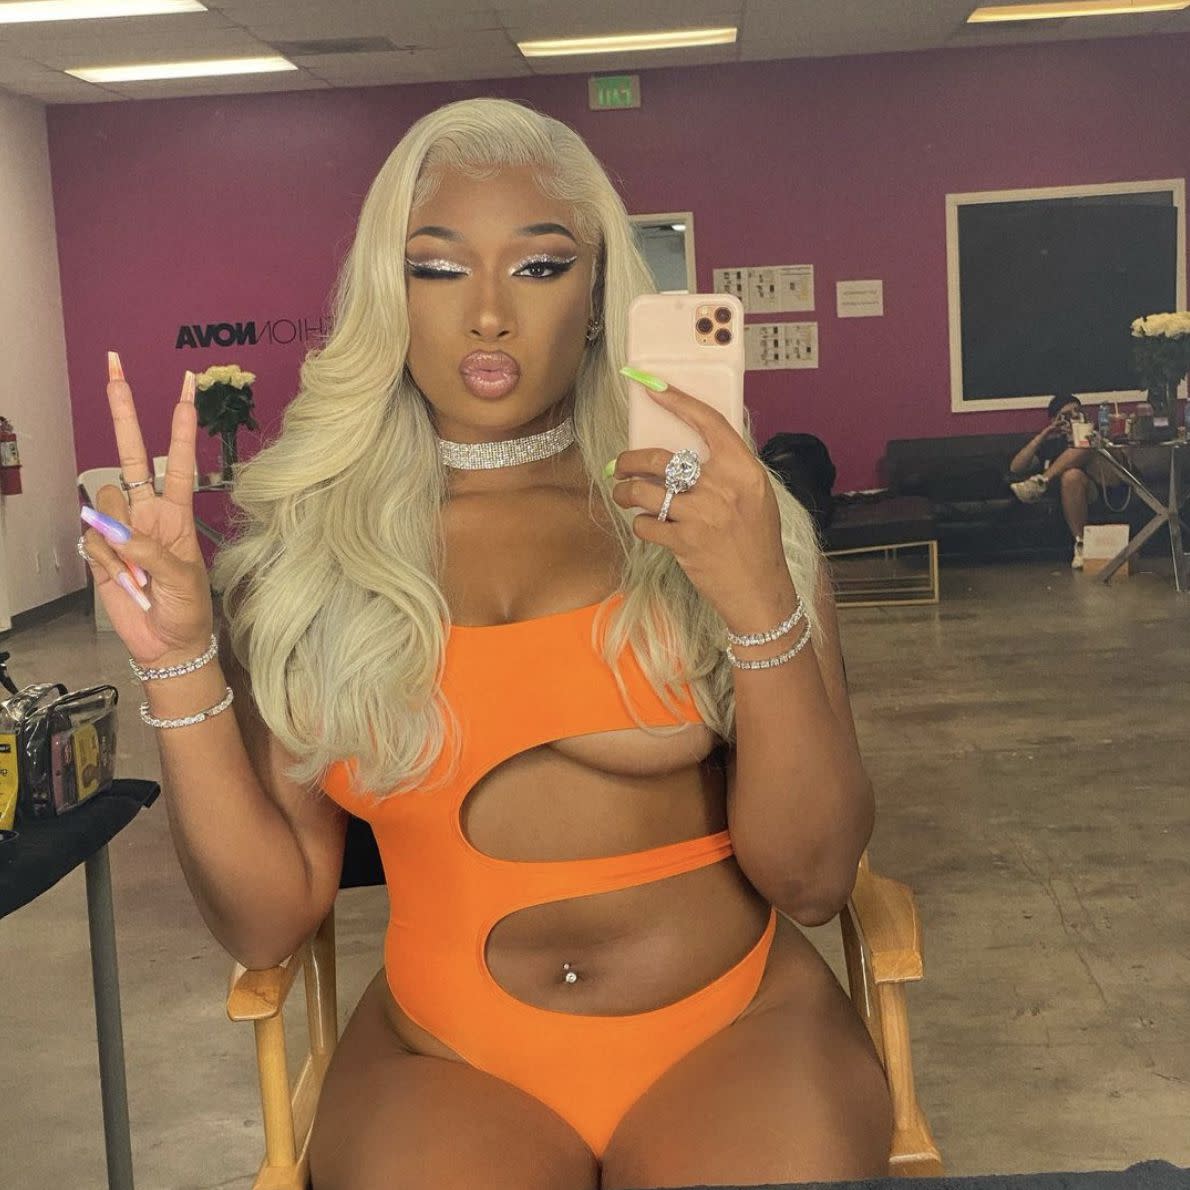 "Savage" rapper teases a new collection from FashionNova with a bright orange one-piece on Tuesday, June 15, 2021. "I’m working new @fashionnova dropping soon"